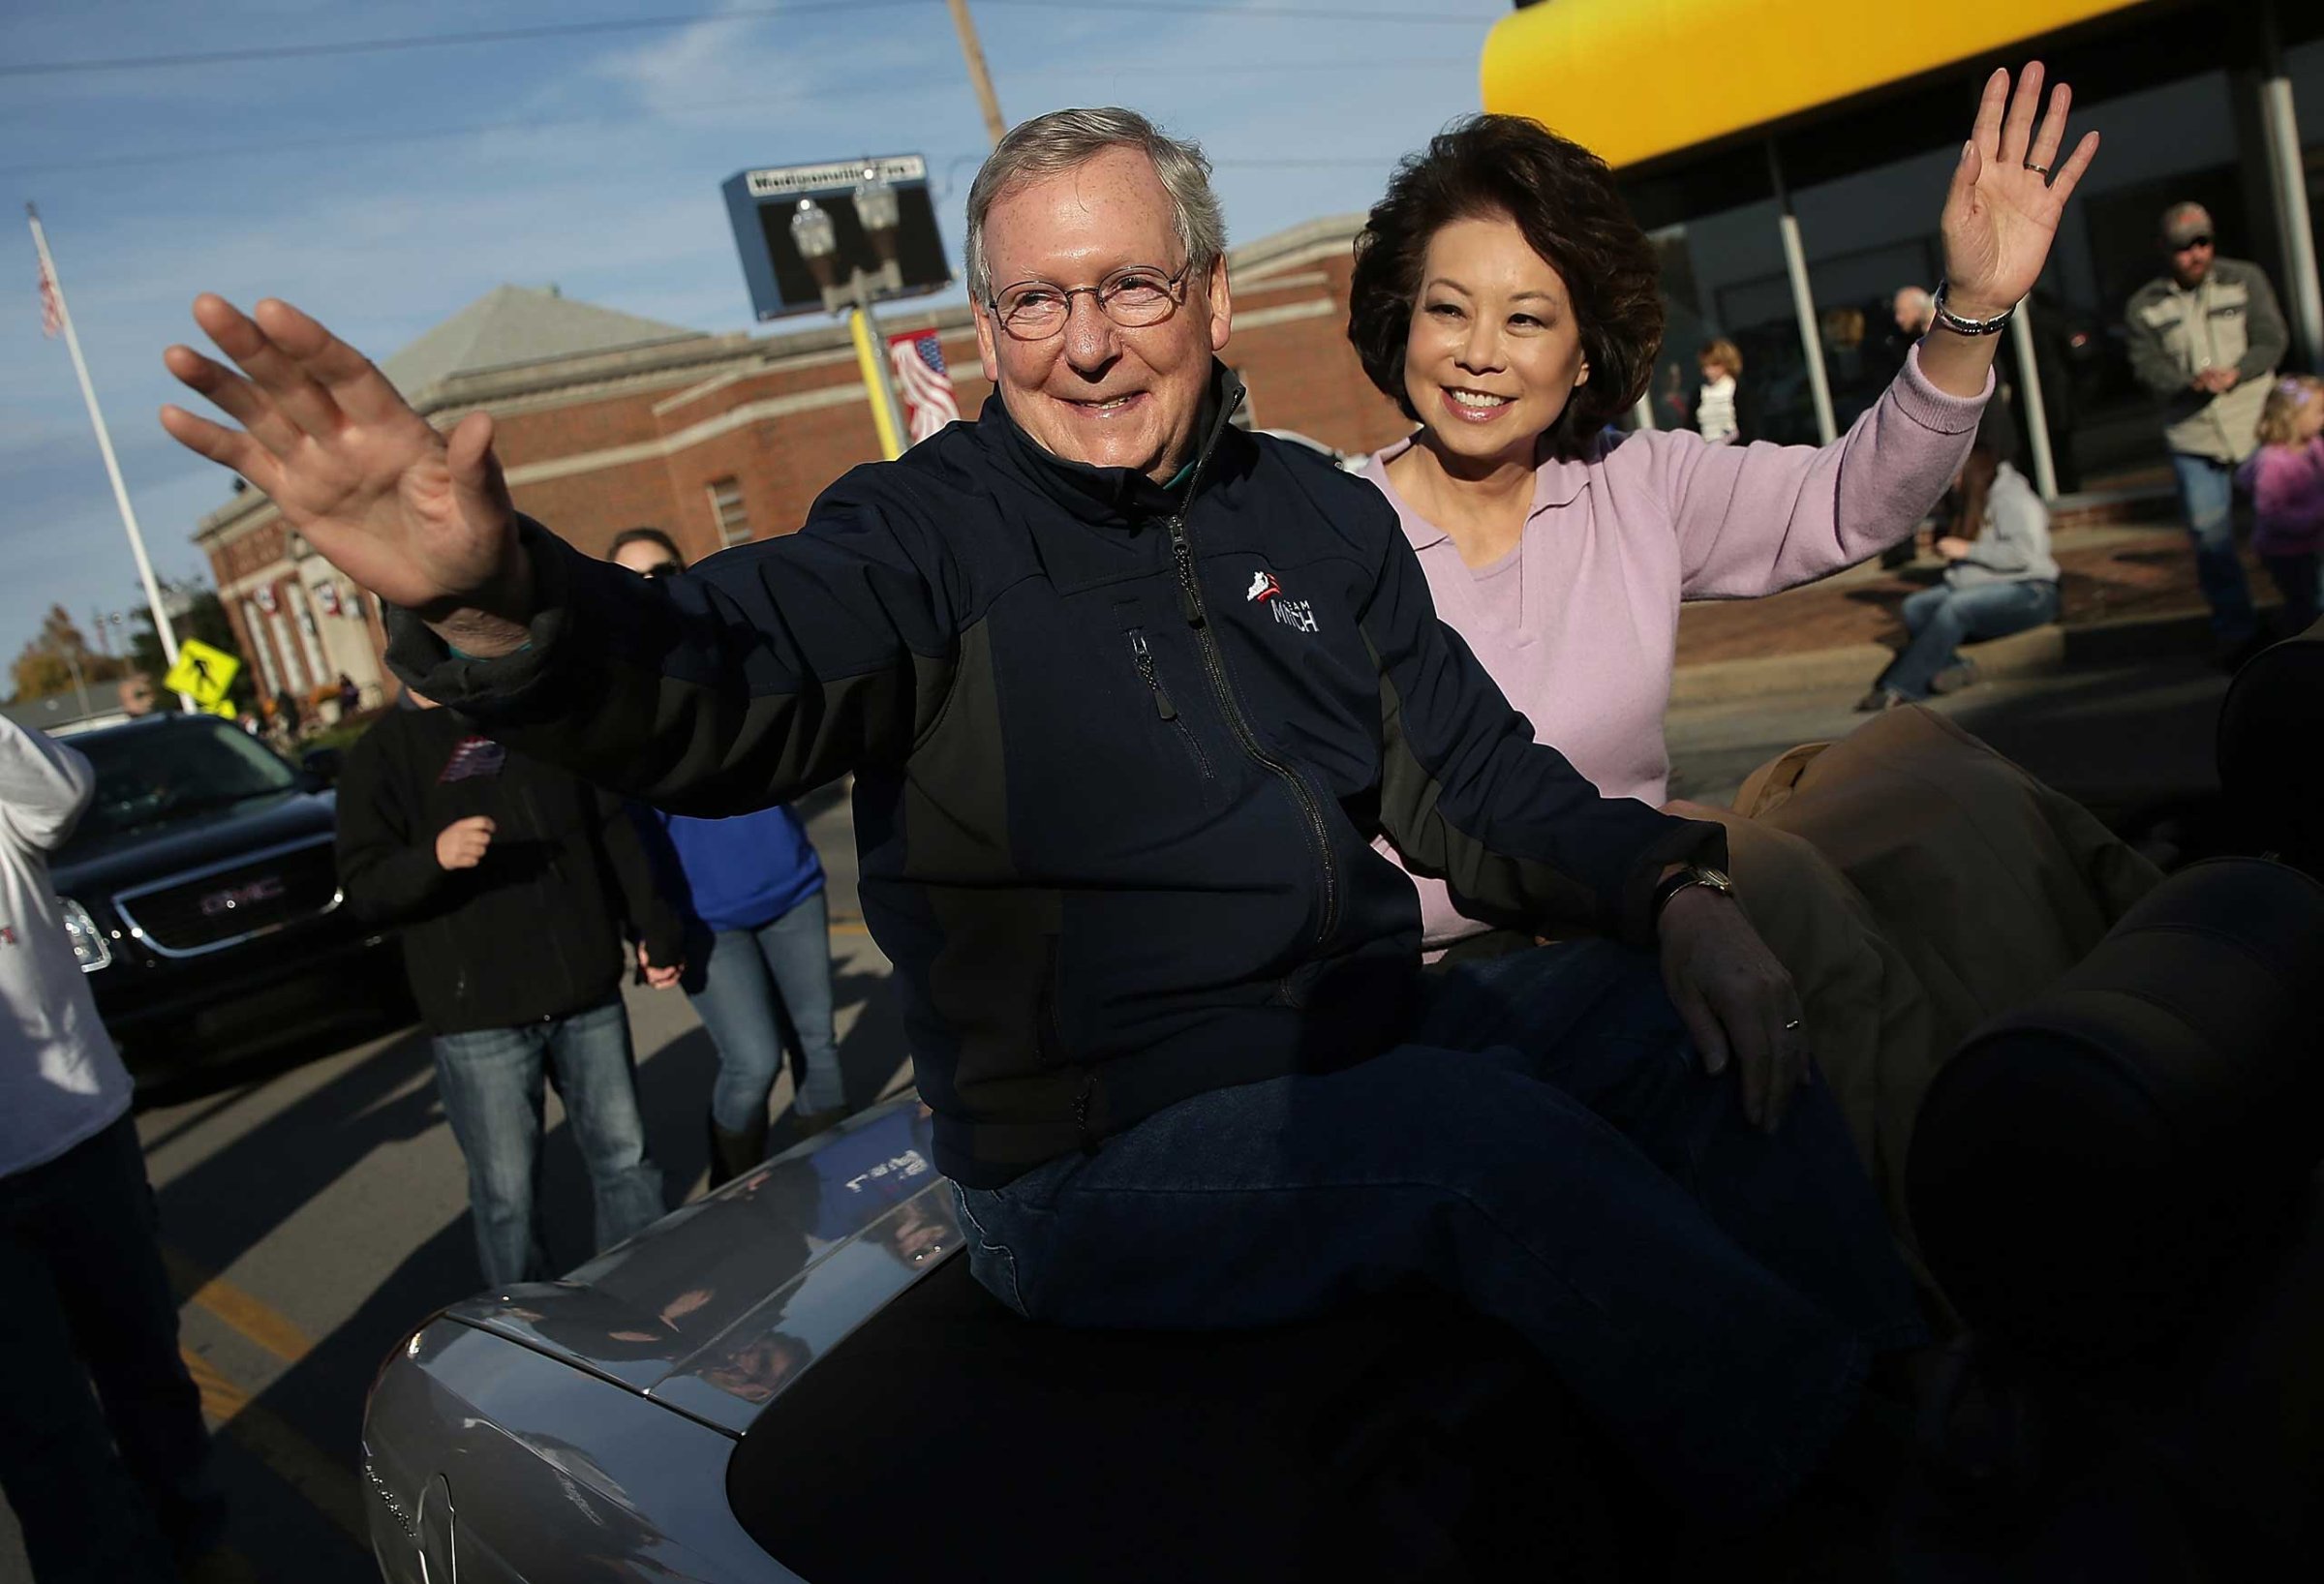 Senate Minority Leader Mitch McConnell (R-KY) waves while riding with his wife Elaine Chao (R) in the Hopkins Country Veterans Day Parade on November 2, 2014 in Madisonville, Ky.